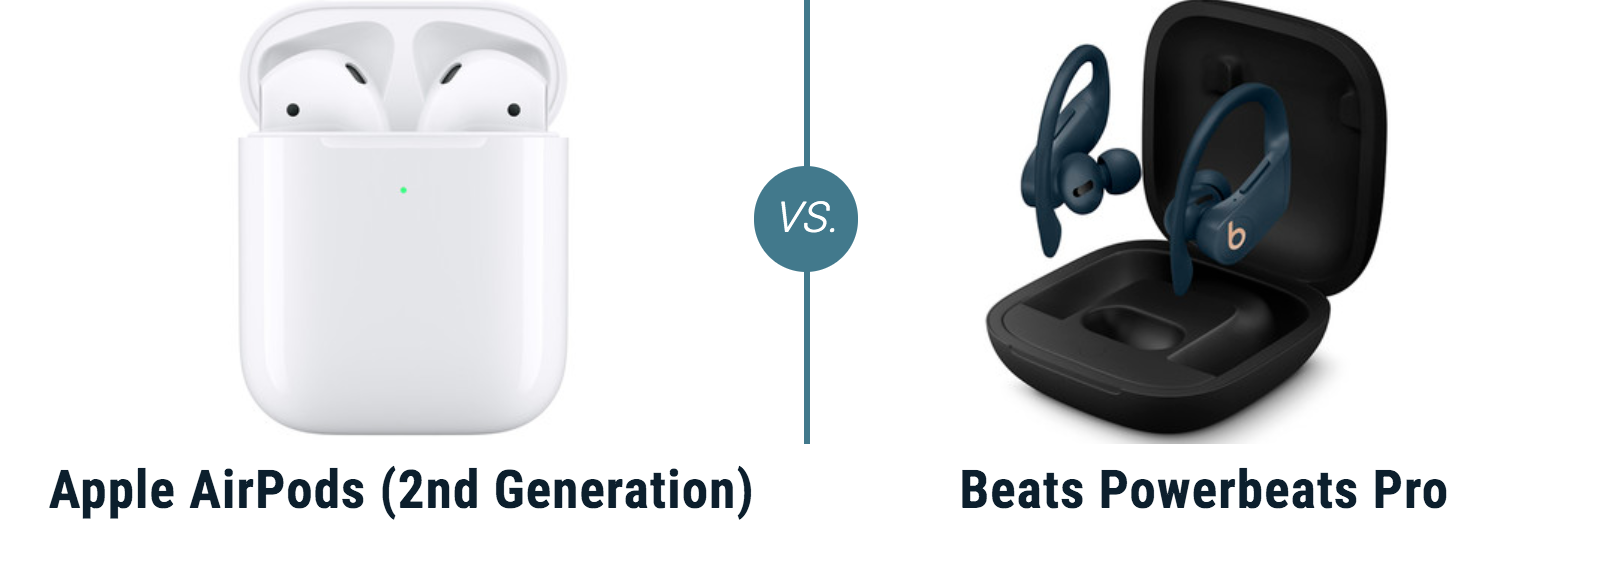 who owns powerbeats